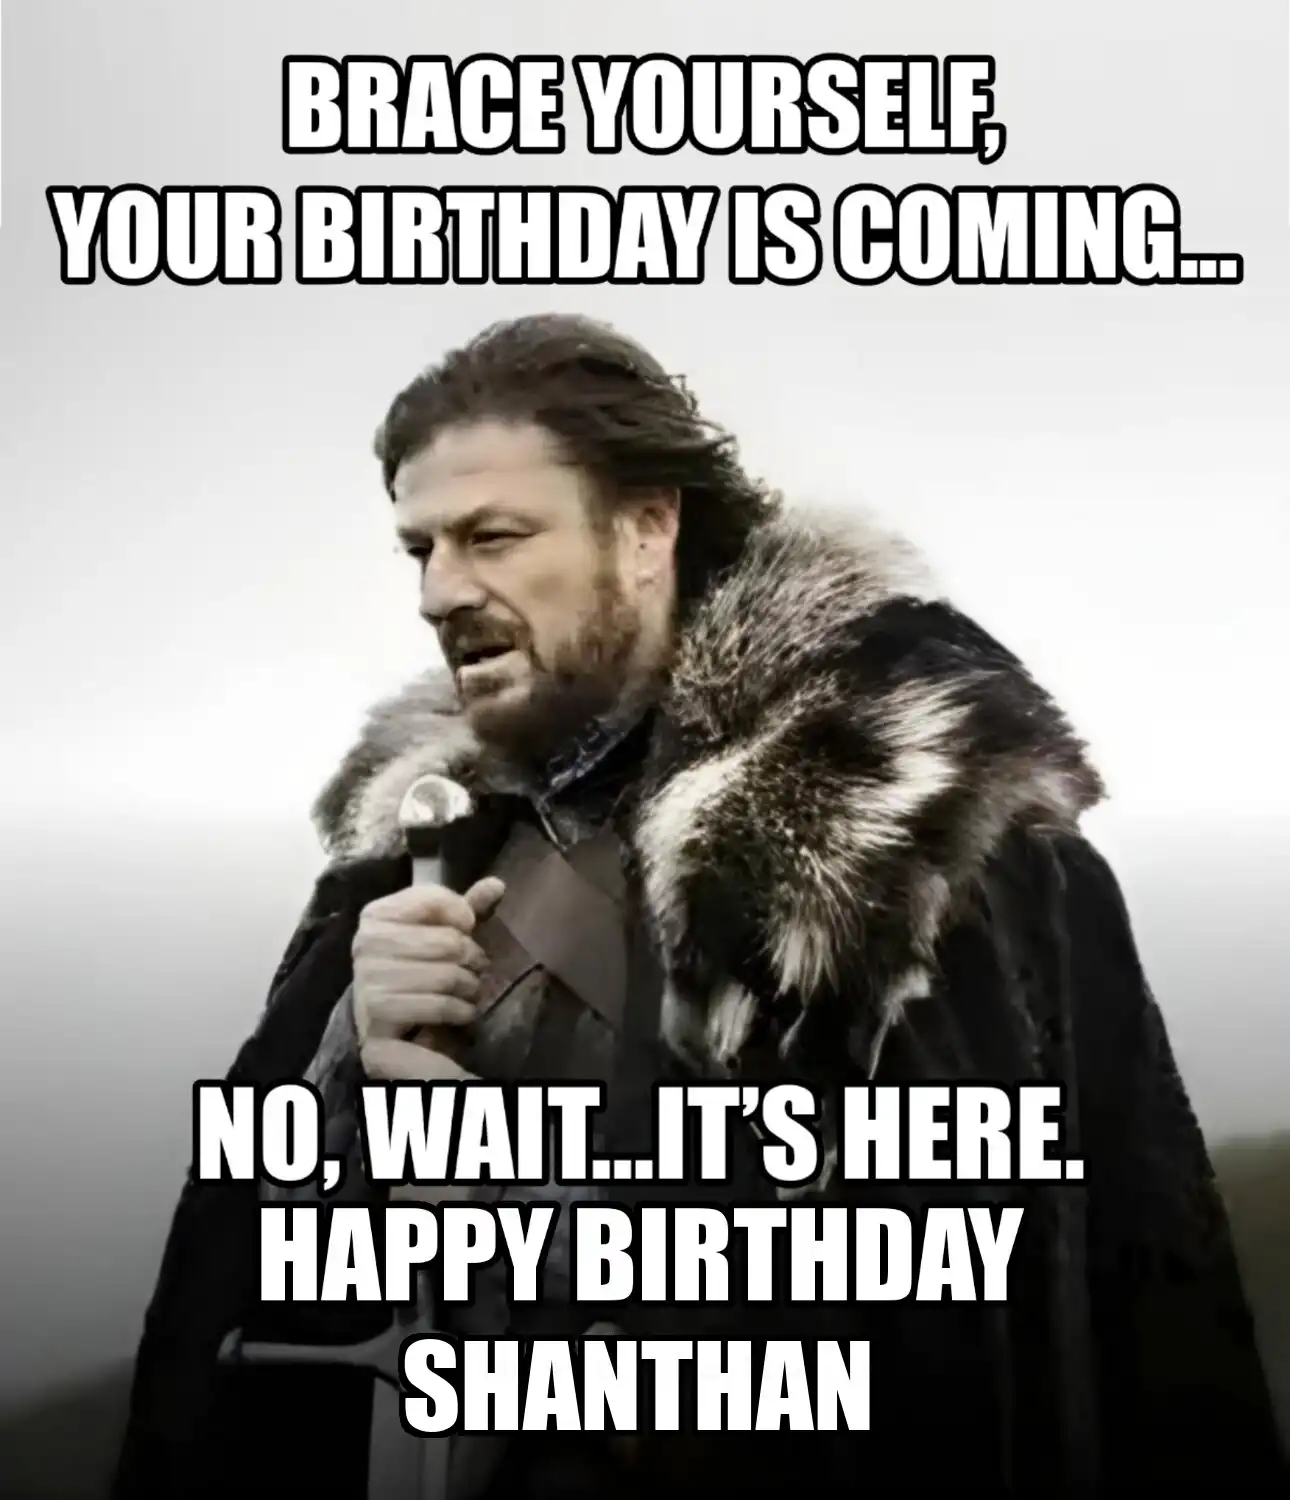 Happy Birthday Shanthan Brace Yourself Your Birthday Is Coming Meme